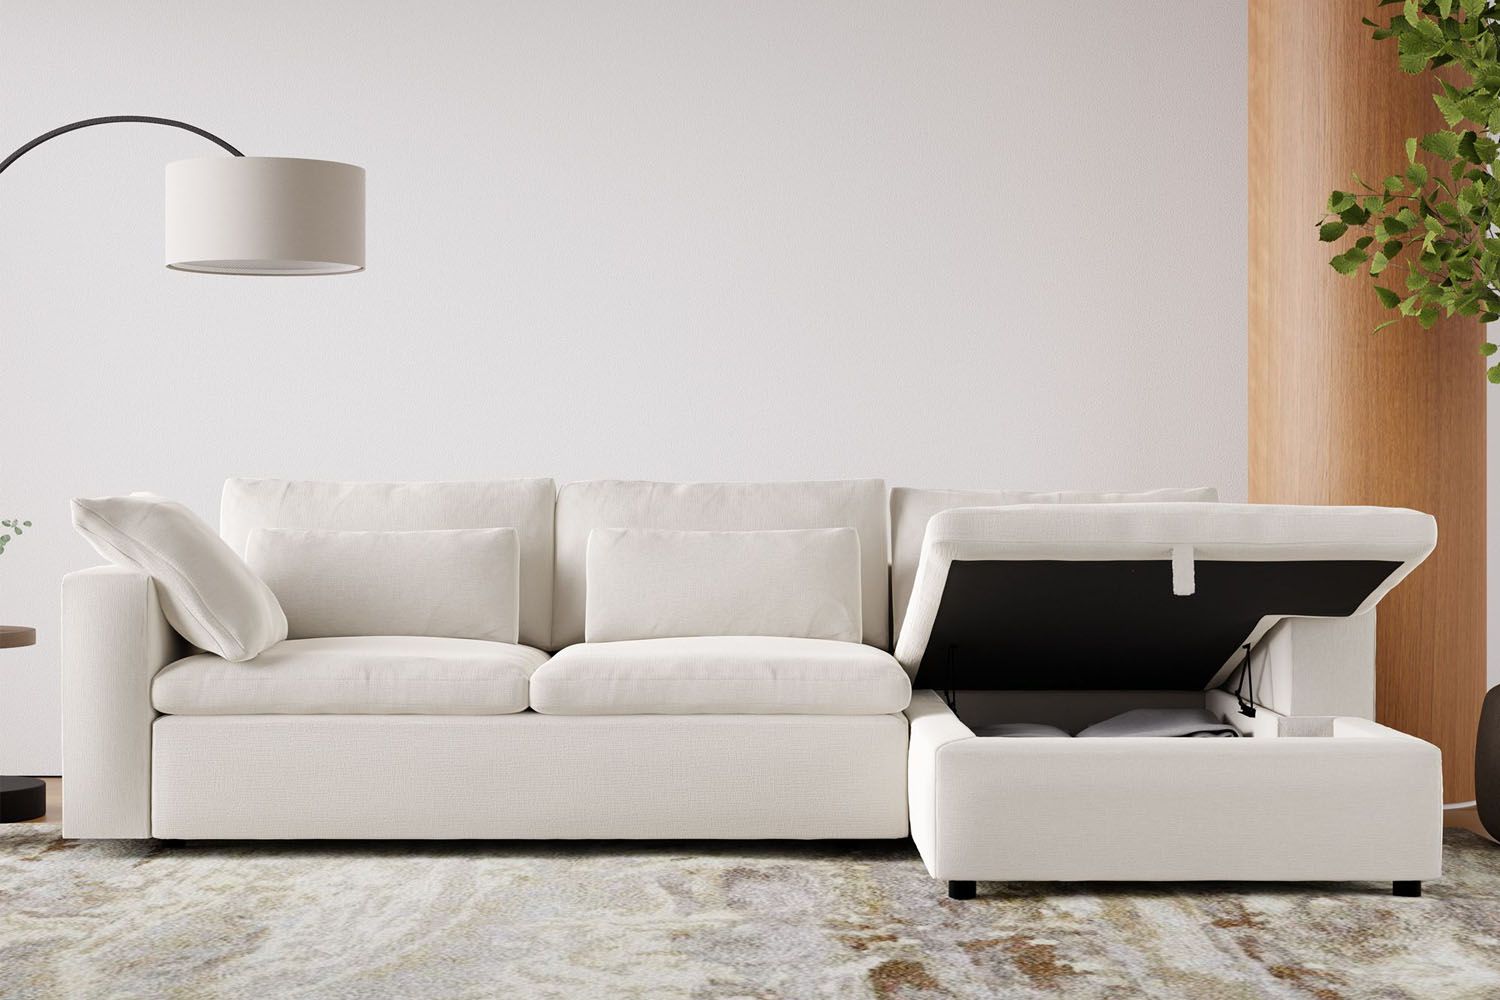 Sectional Sofas With Storage For Families: 10 Easy Pieces Within Sectional Sofa With Storage (Gallery 10 of 20)